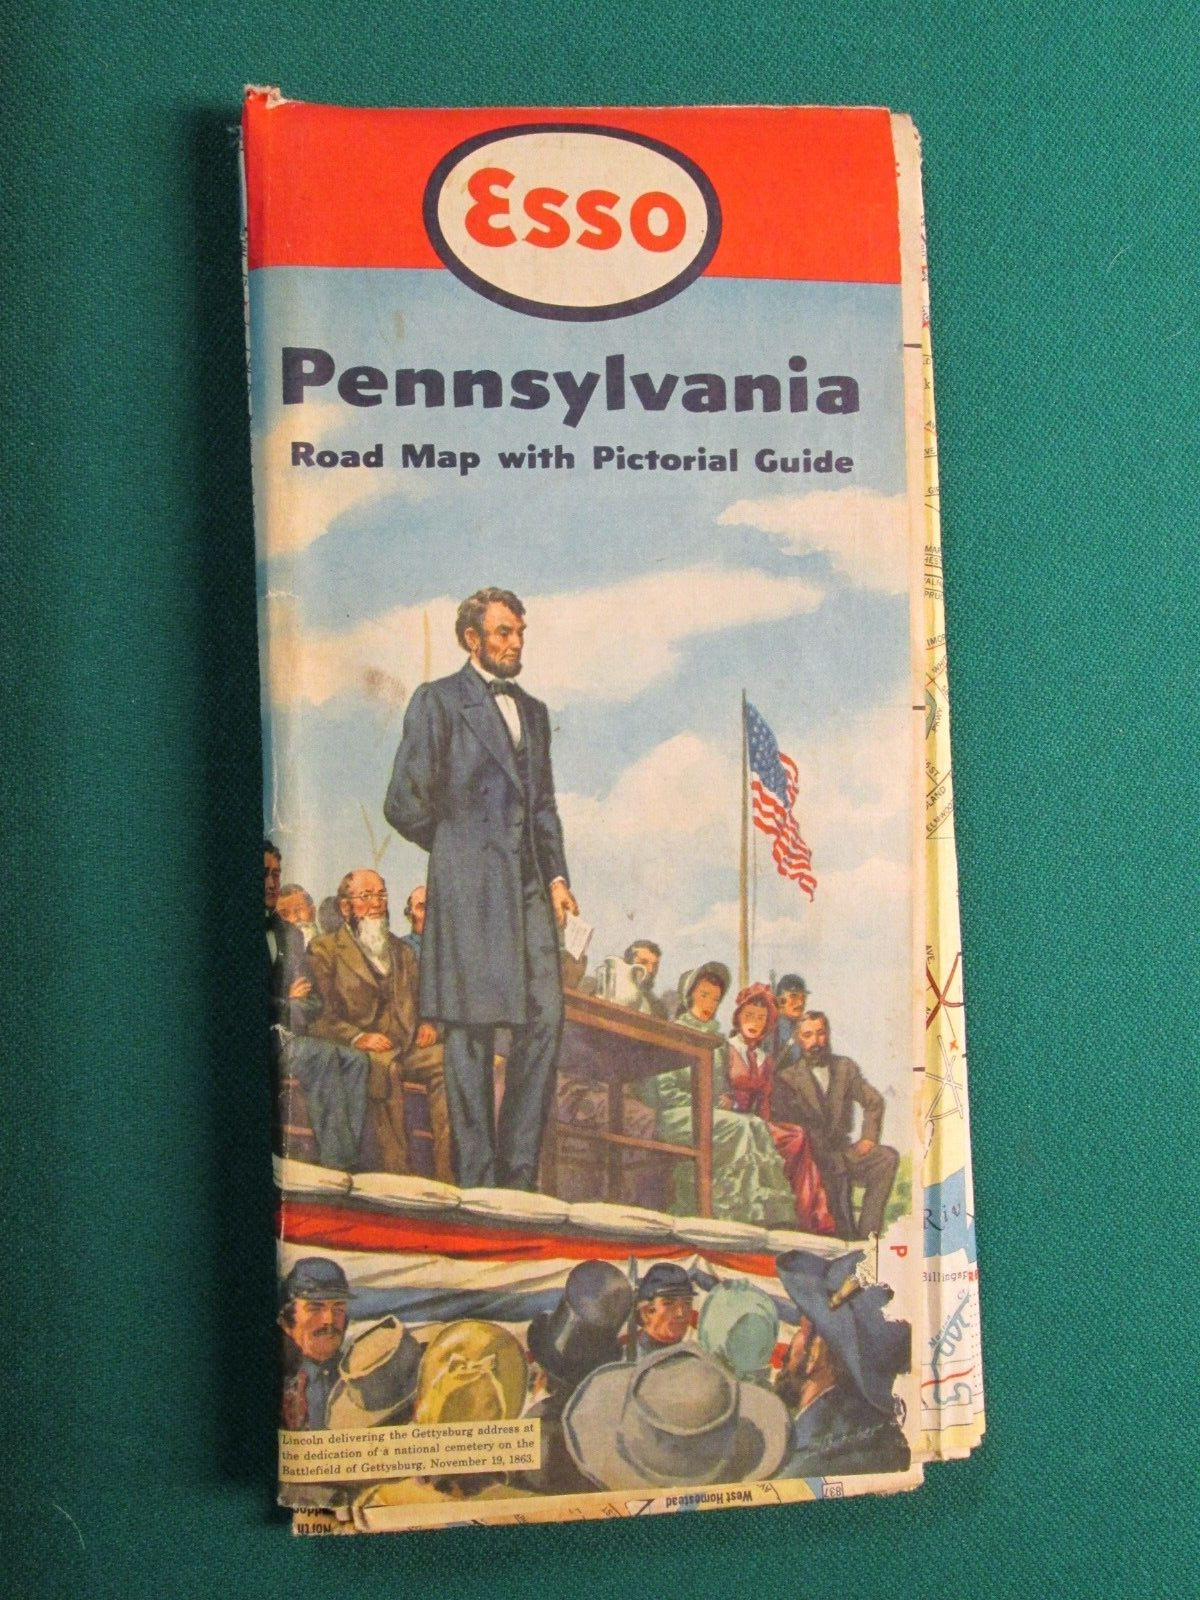 ESSO OIL 1952 HIGHWAY ROAD MAP OF PENNSYLVANIA